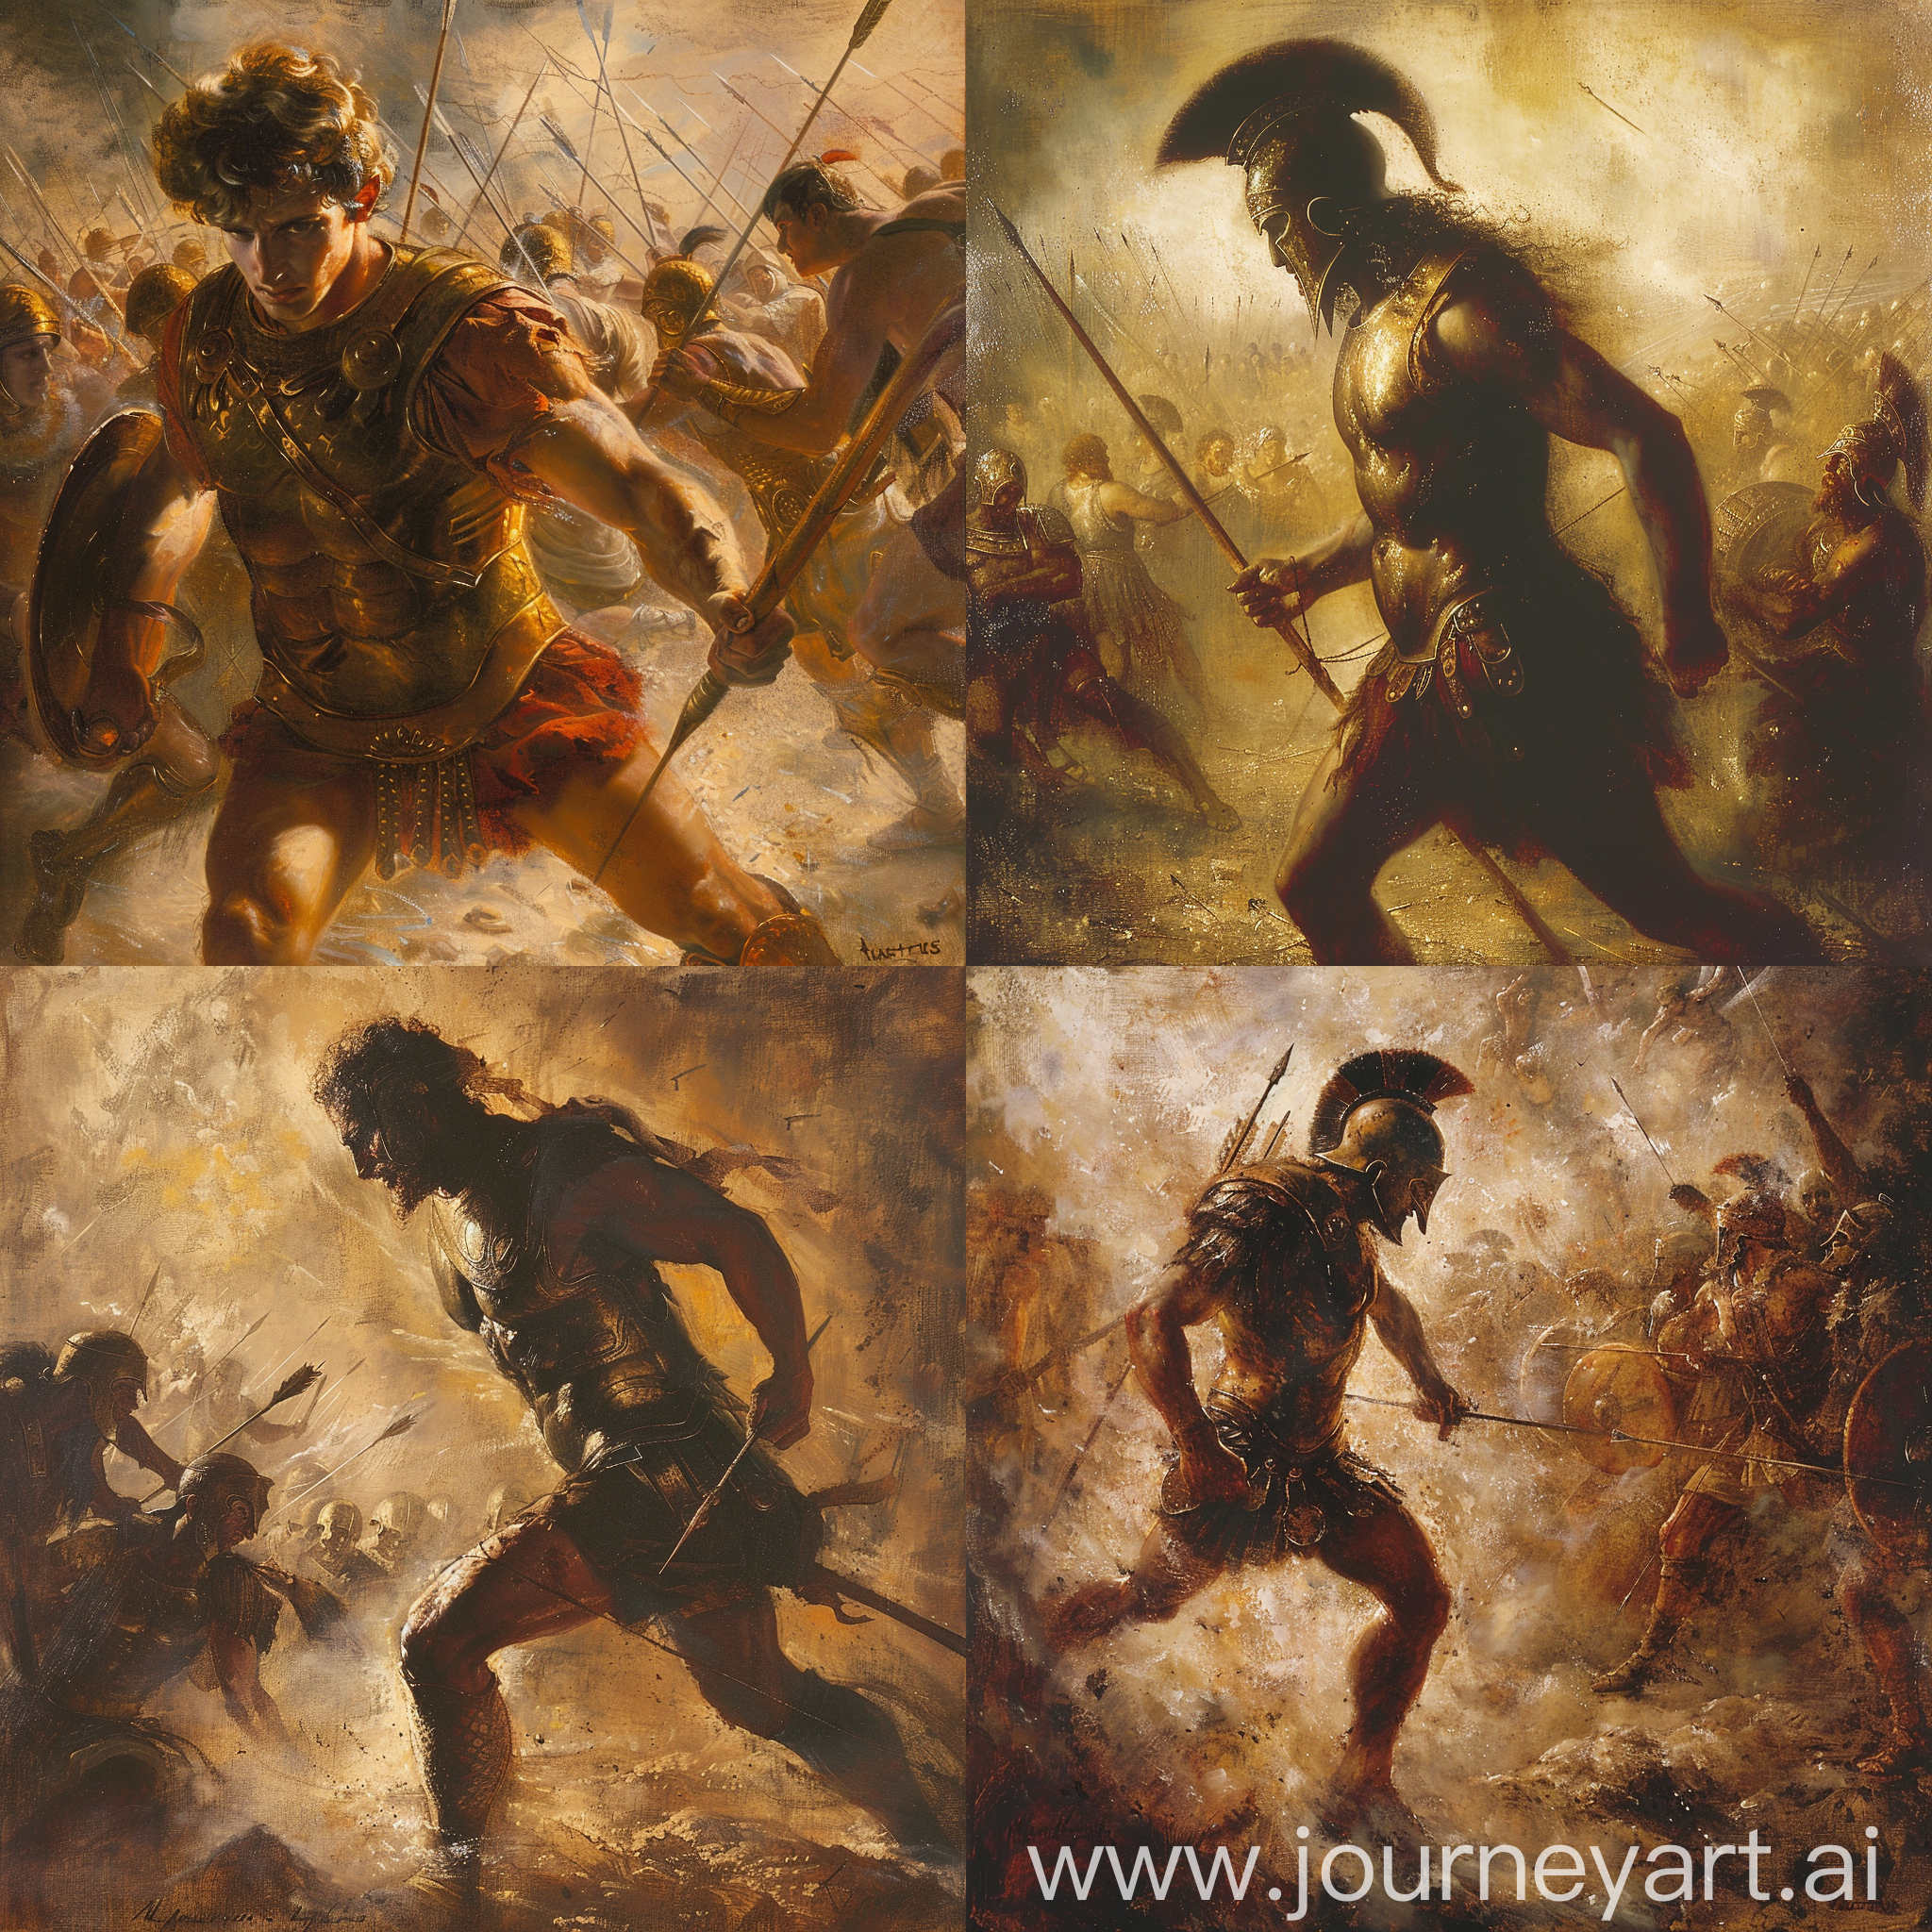 This oil painting captures the moment of Achilles' vulnerability, as he is struck by an arrow in his heel, the only point where he is not invulnerable. The scene depicts Achilles in the heat of battle, his armor gleaming in the sunlight as he charges forward with his spear. The expression on his face is one of determination and focus, unaware of the impending danger behind him. The background is filled with chaos and turmoil, with warriors clashing and clouds of dust swirling around them. In the distance, the figure of Paris can be seen, drawing his bow and taking aim at Achilles' unprotected heel. The colors are rich and vibrant, with warm tones dominating the scene to convey the intensity of the moment. The painting serves as a reminder of the fragility of even the mightiest heroes and the tragic consequences of their vulnerabilities.